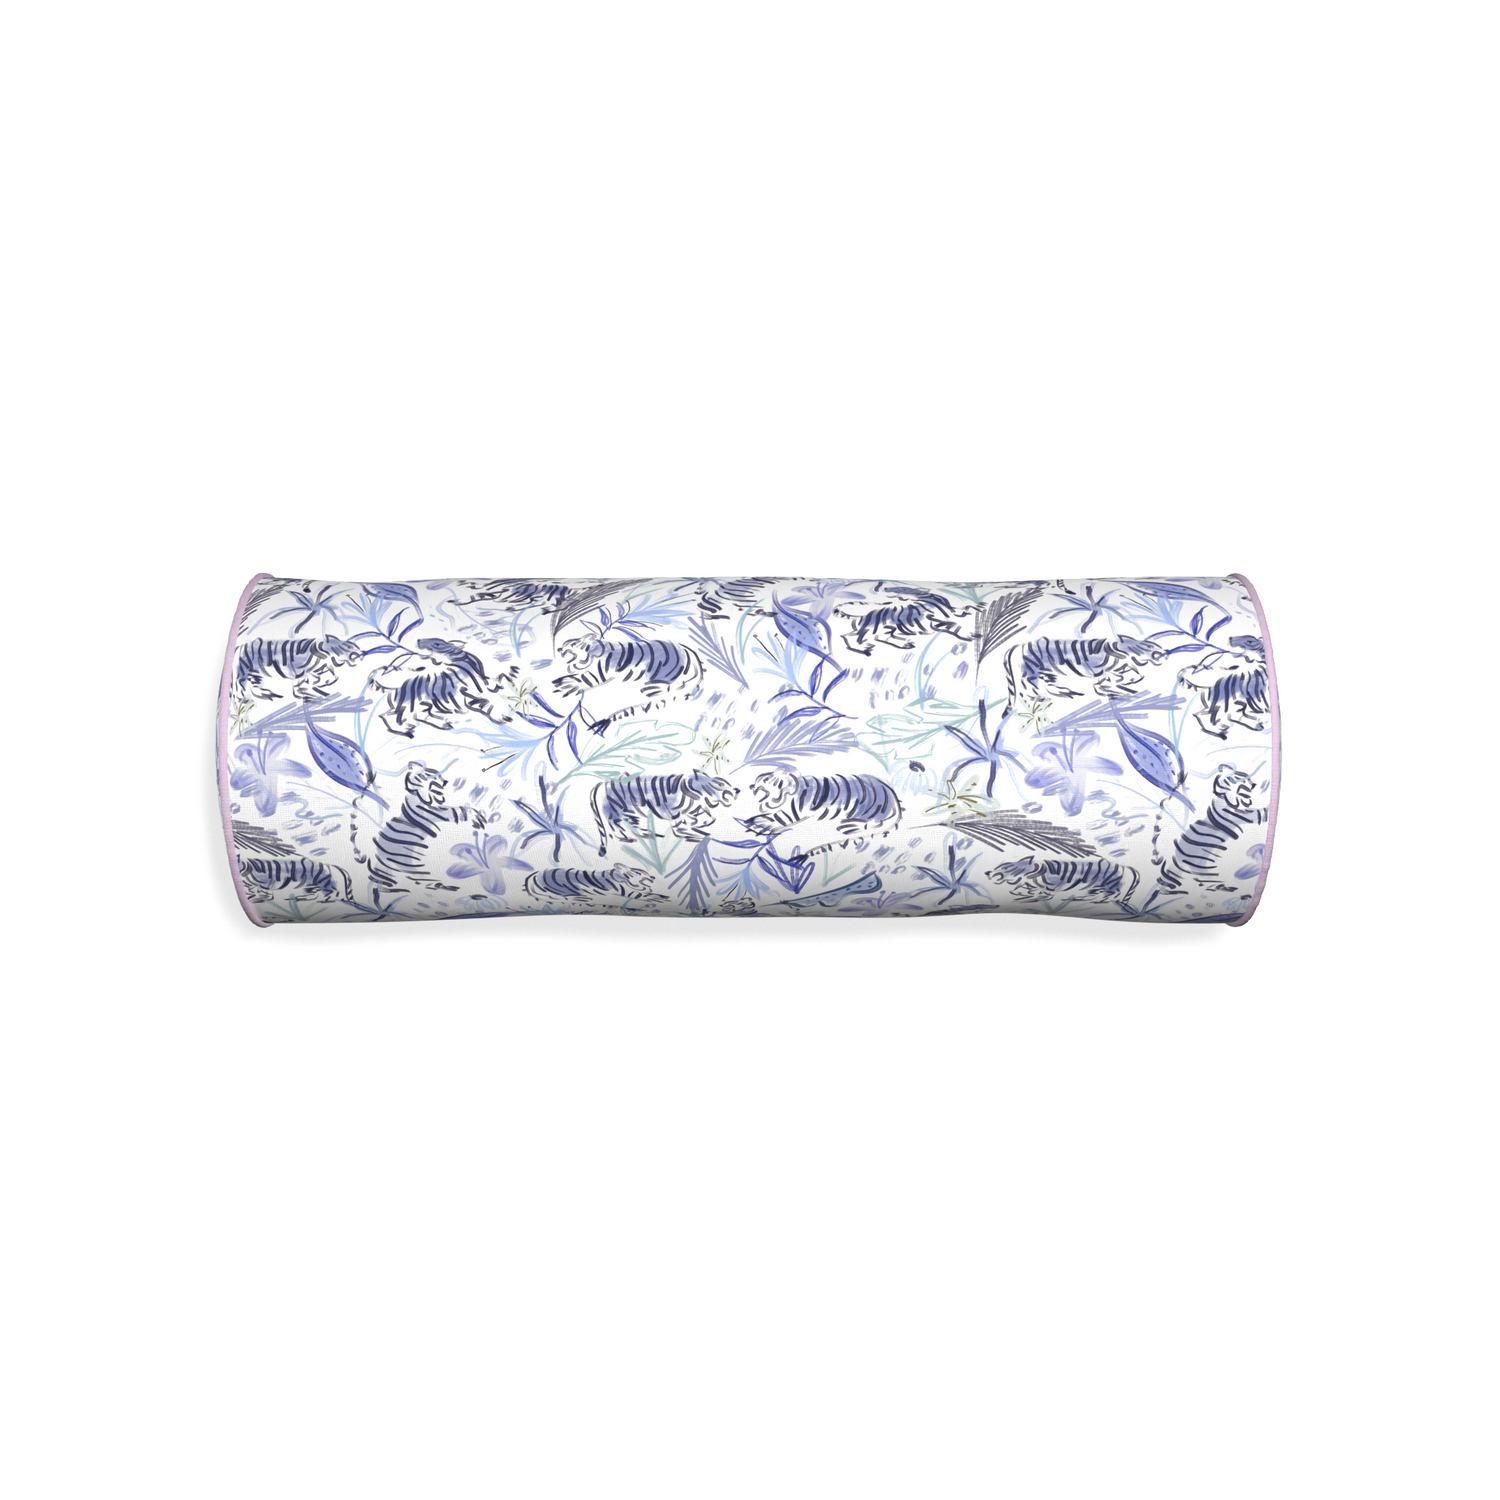 Bolster frida blue custom blue with intricate tiger designpillow with l piping on white background